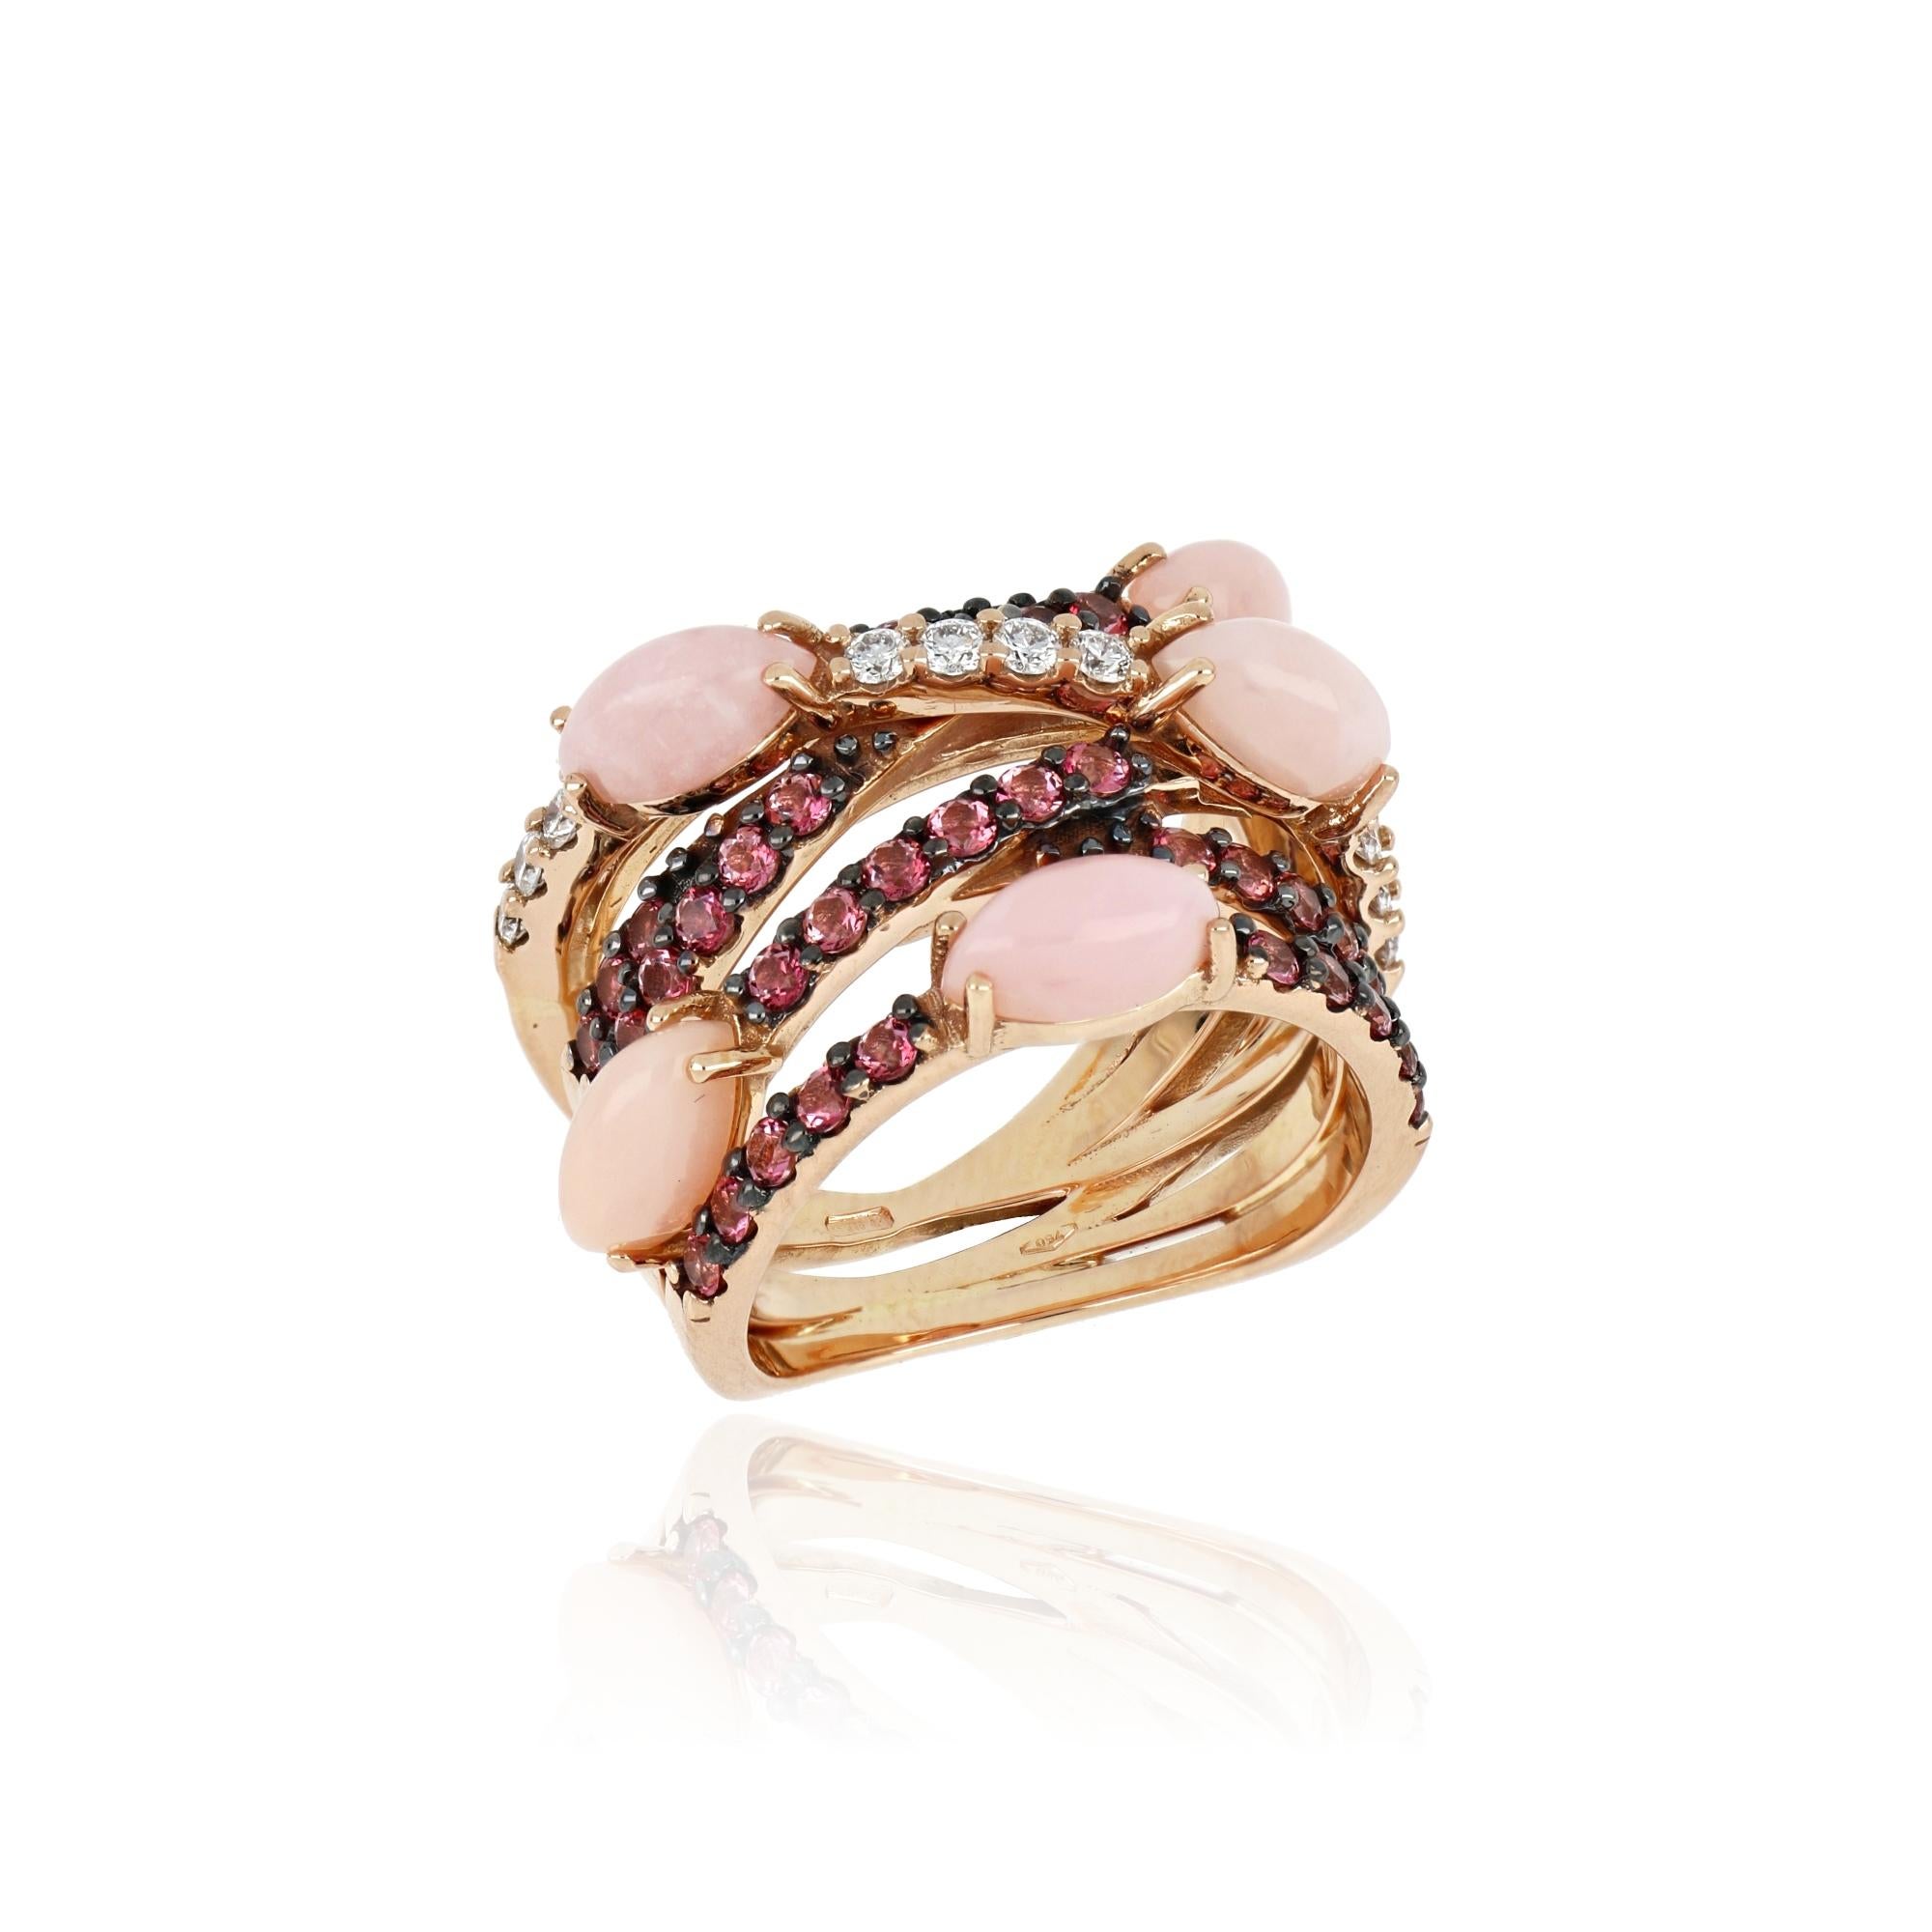 For Sale:  18kt Rose Gold Les Papillons Ring with Pink Opal, Pink Topazes and Diamonds 3